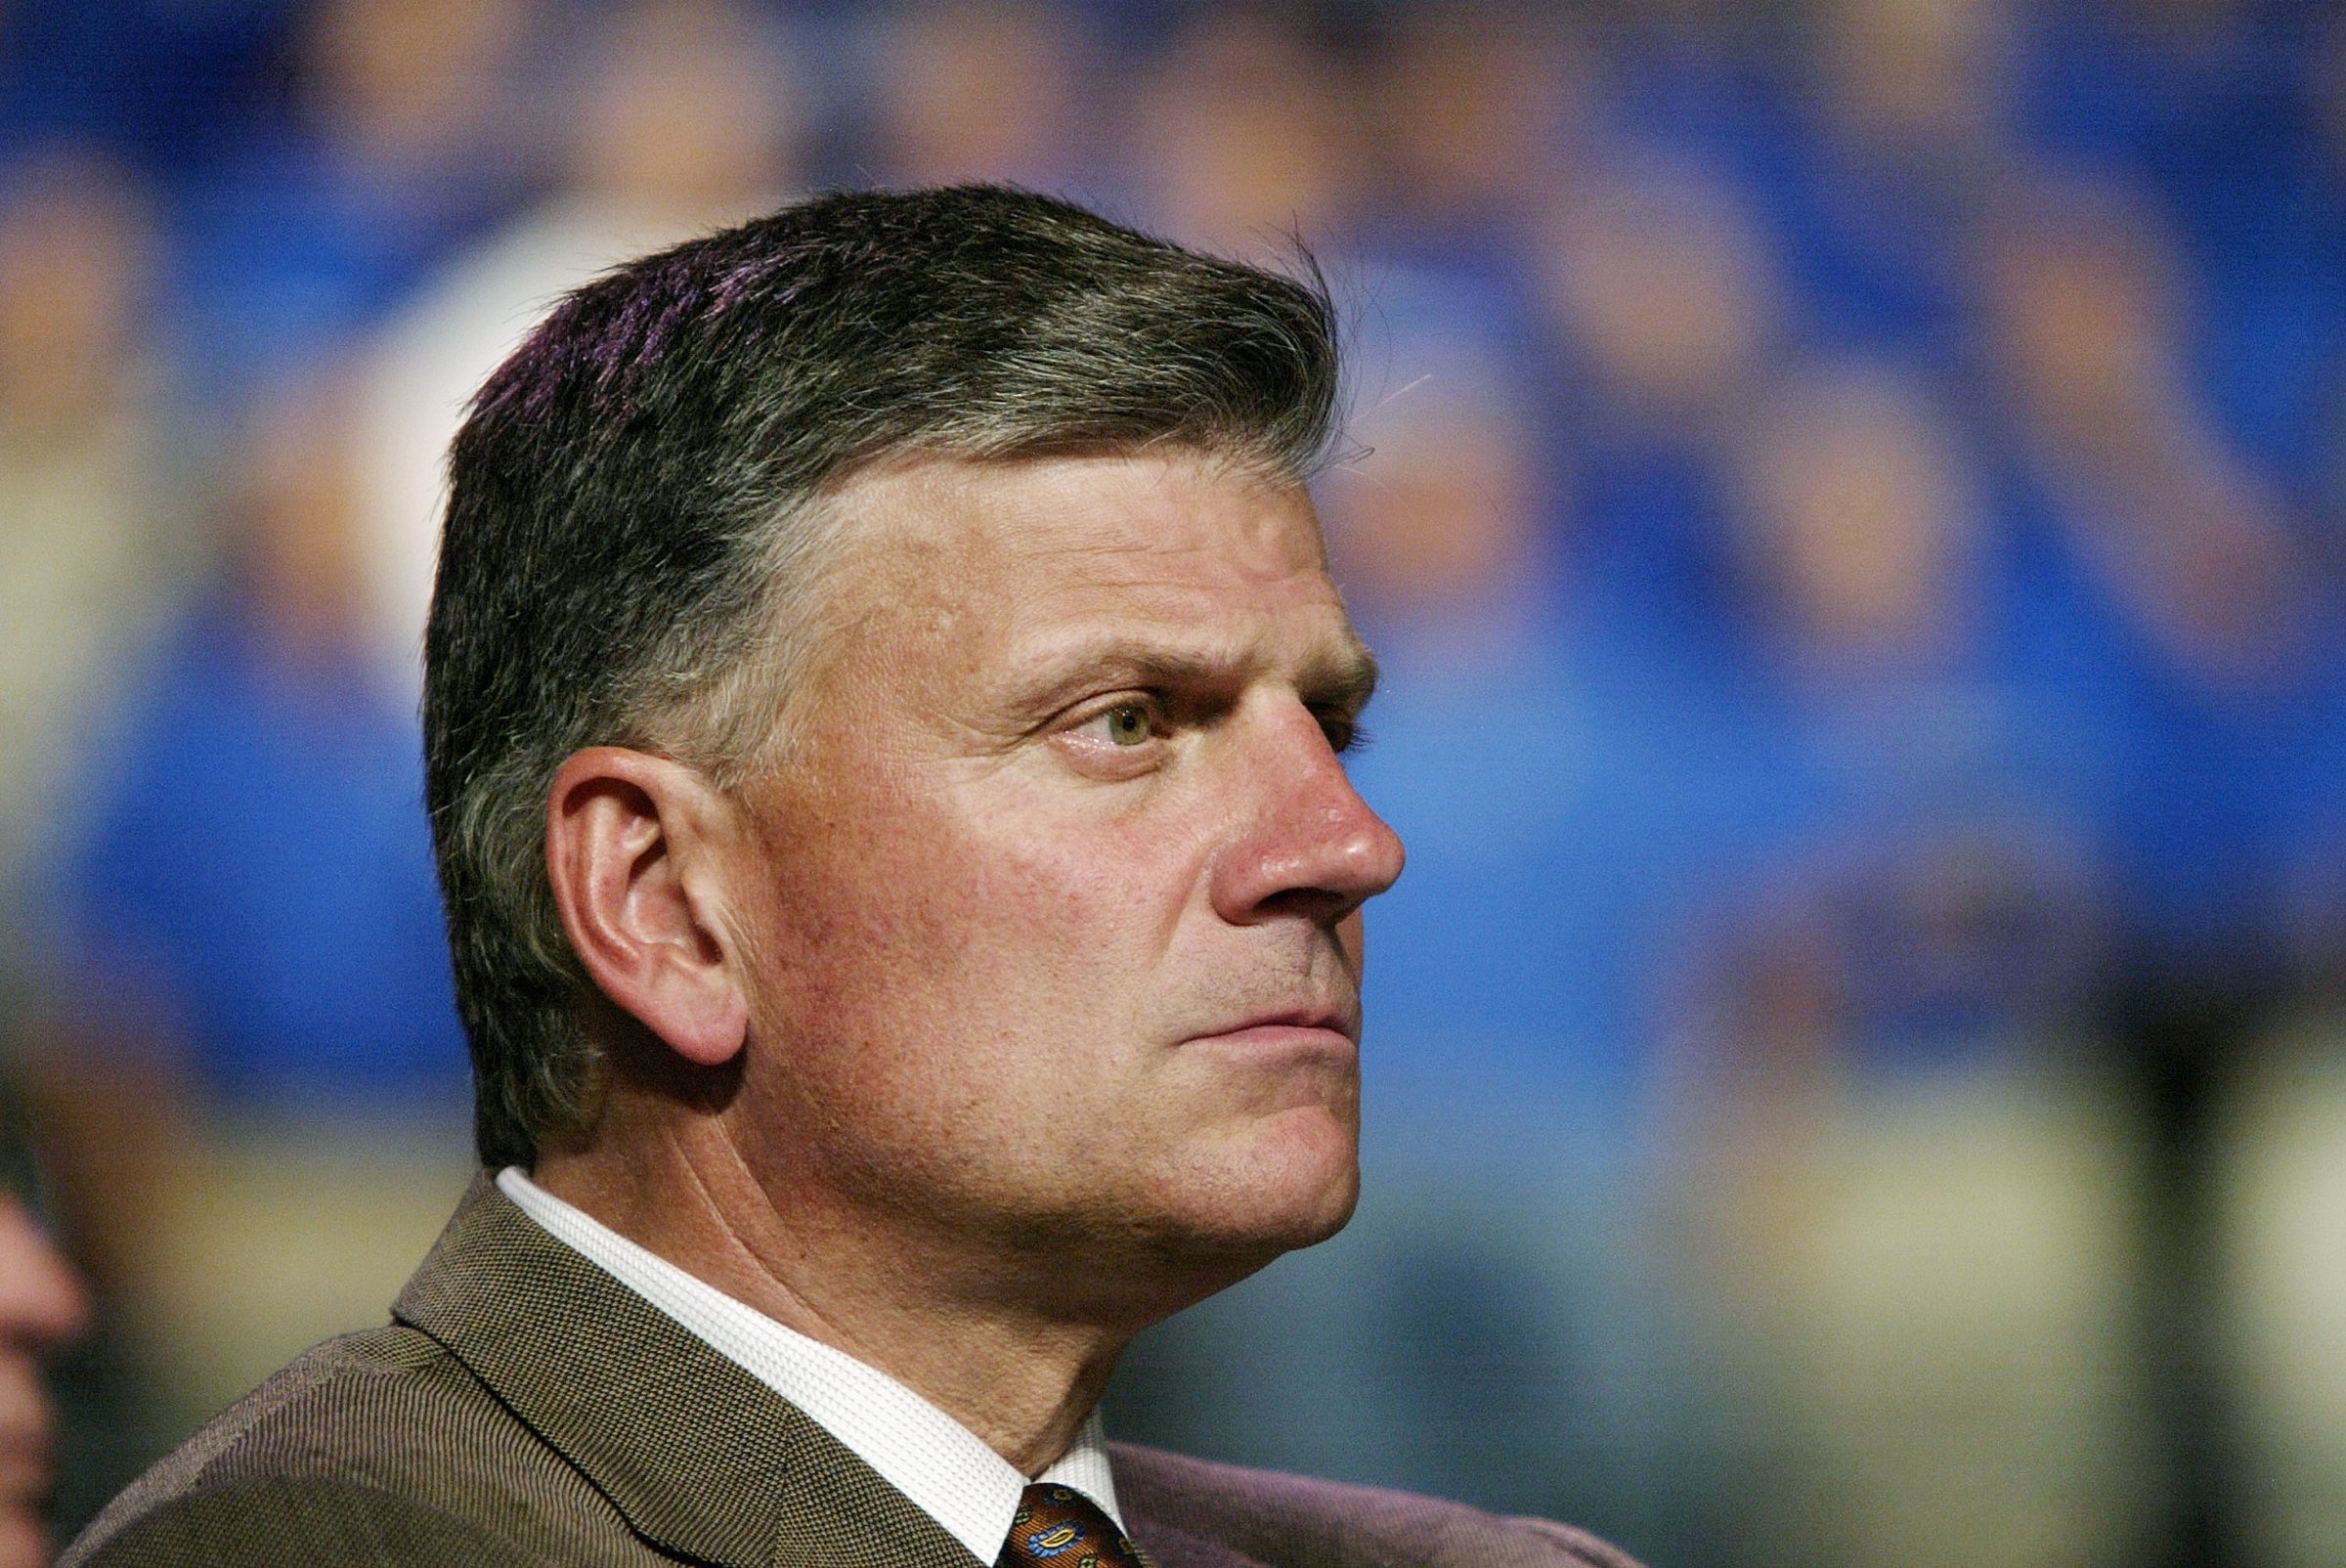 Reverend Franklin Graham looks on at a Billy Graham rally on June 12, 2003 in Oklahoma City, Oklahoma.